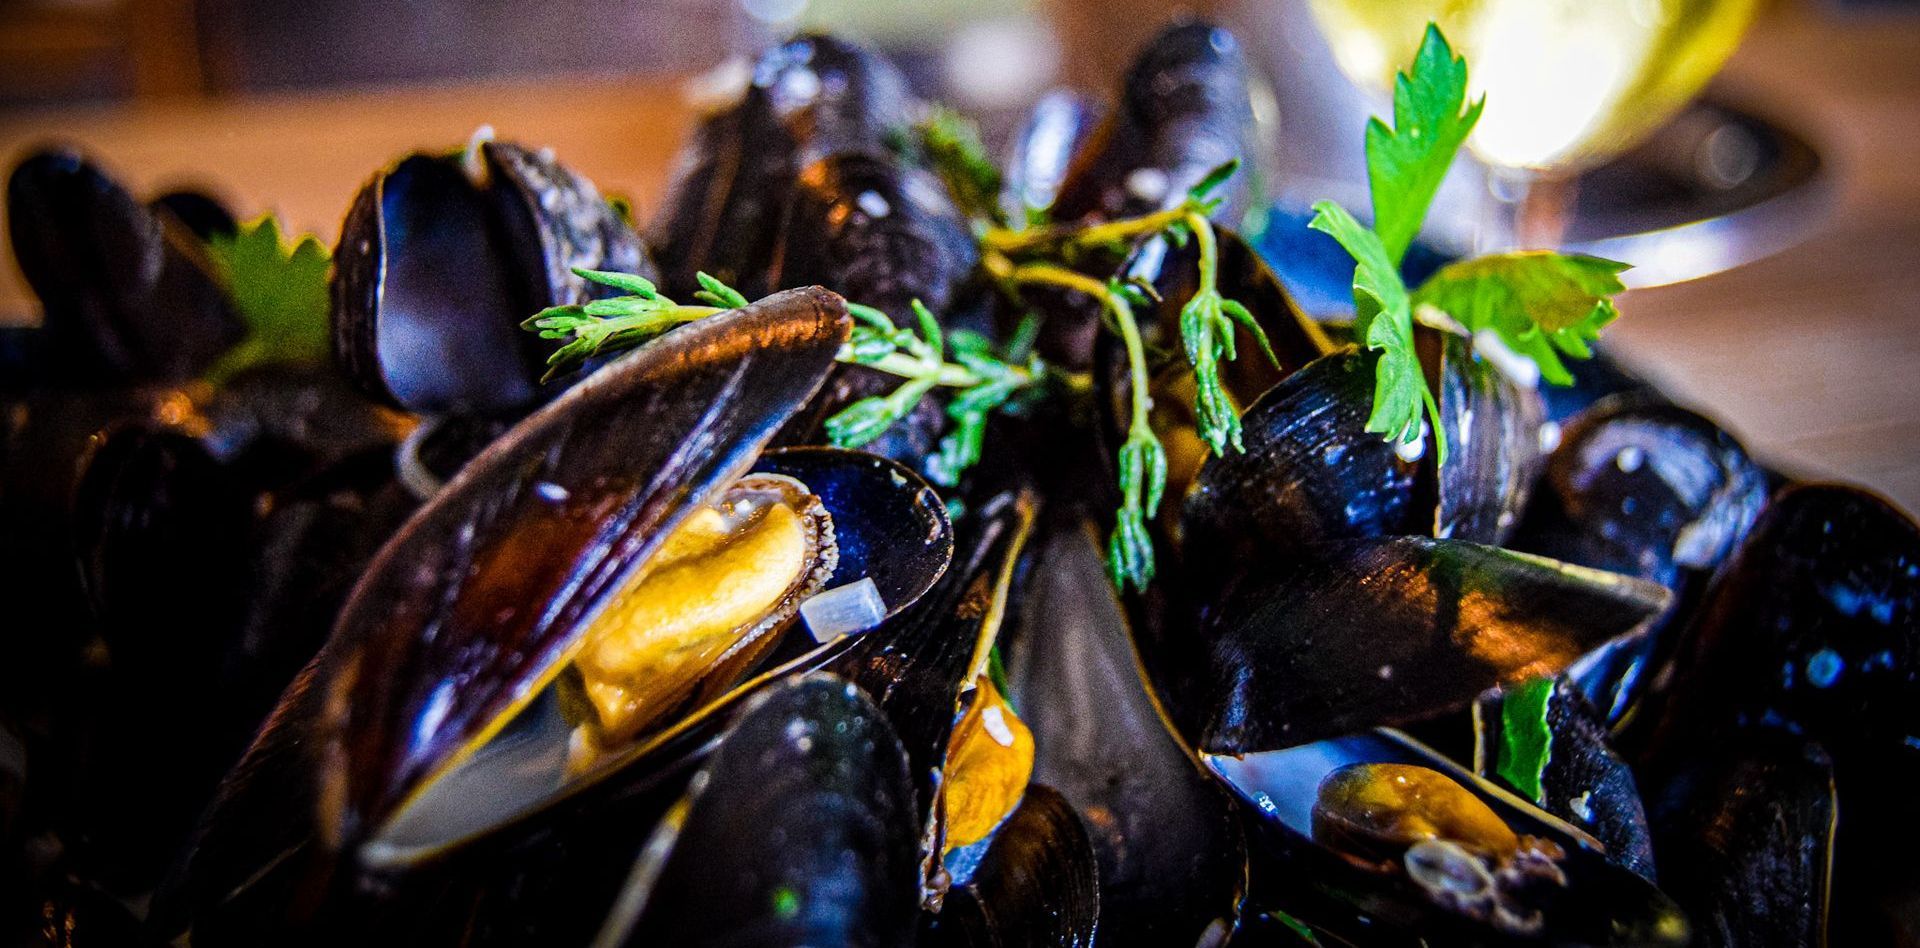 Exmouth mussels with fresh herbs and white wine.